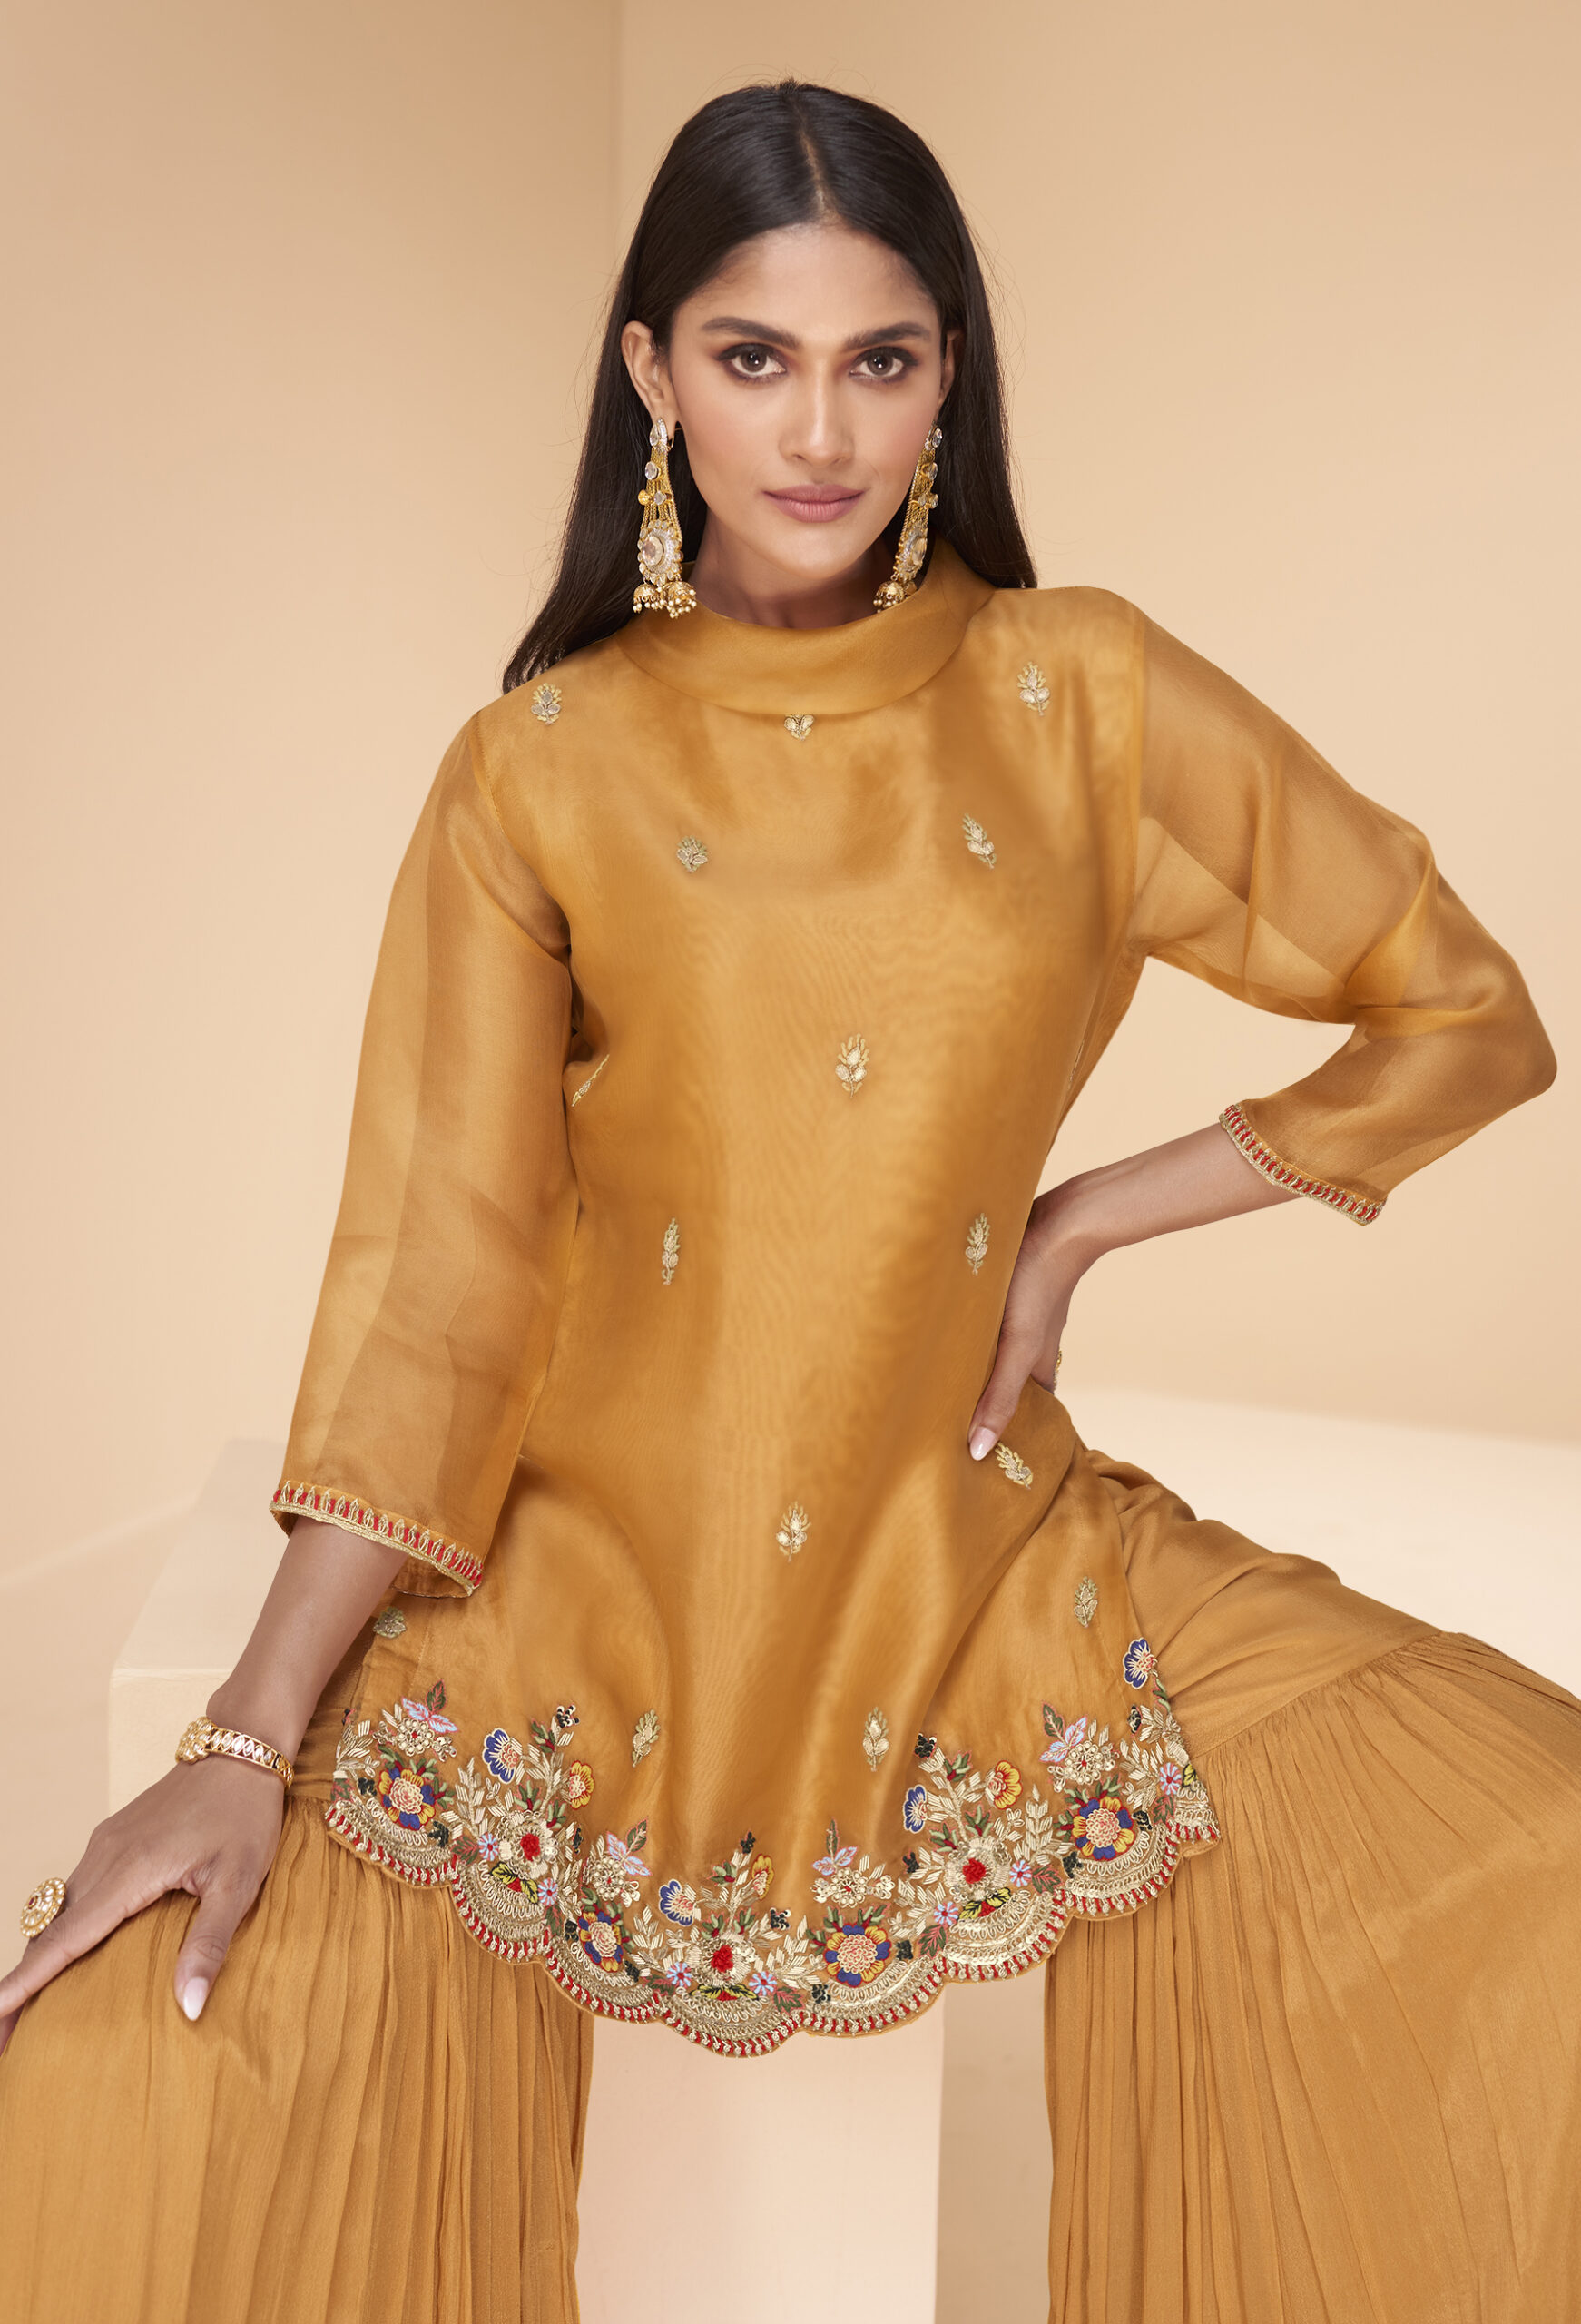 Perfect Haldi outfit in Mustard Color shirt and Sharara with Net dupat –  Amishi by Preet